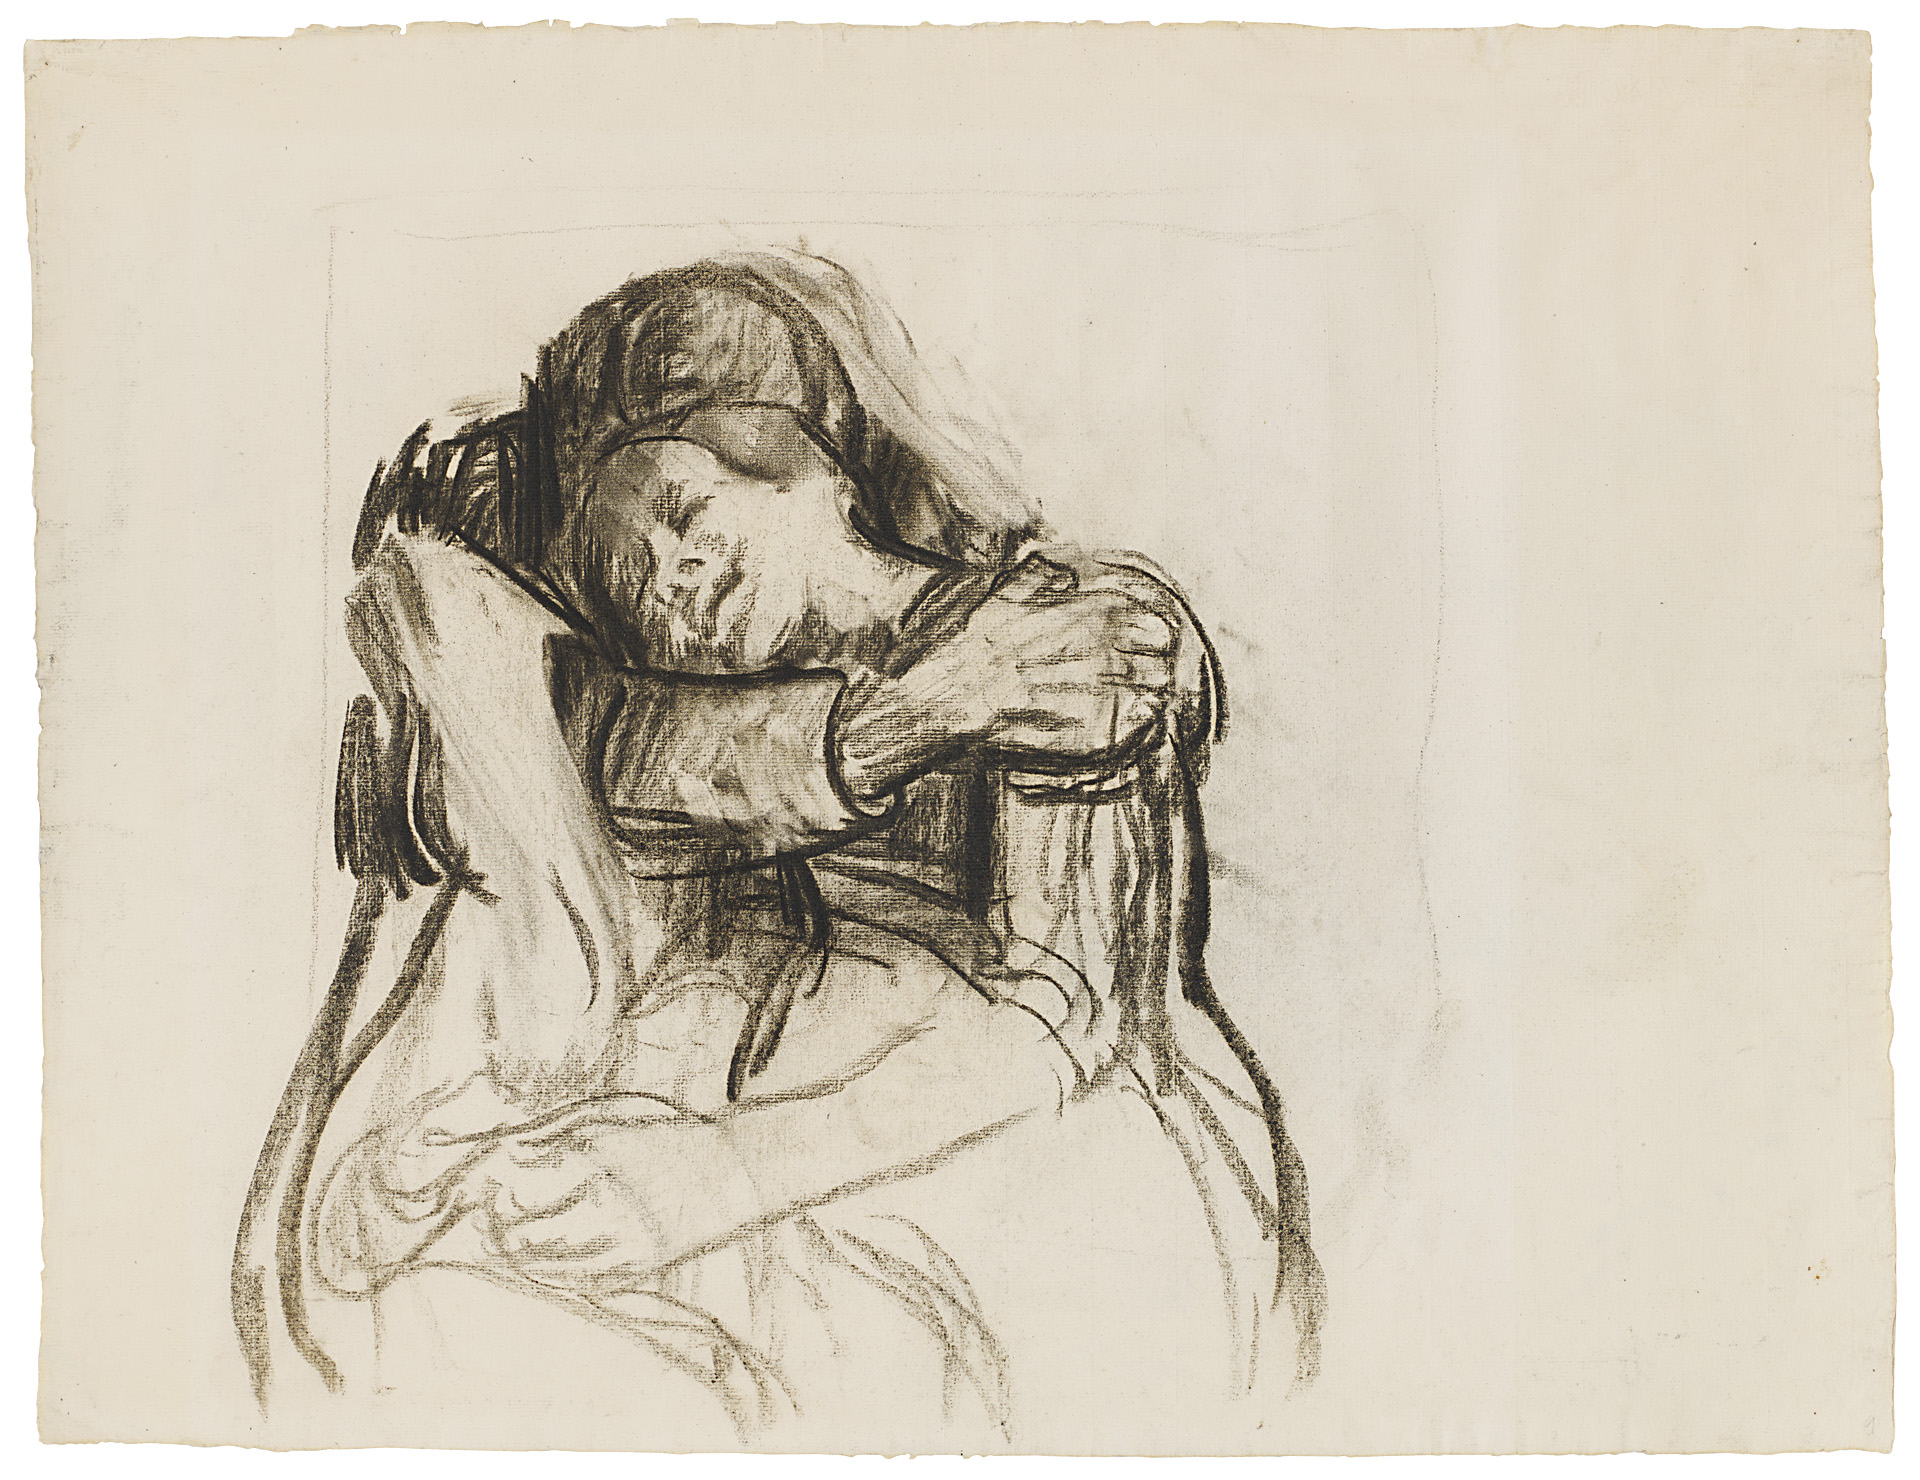 Käthe Kollwitz, The Embrace, c 1909/1910, charcoal drawing, partly blotted, on yellowish laid paper, NT (559a), Cologne Kollwitz Collection © Käthe Kollwitz Museum Köln